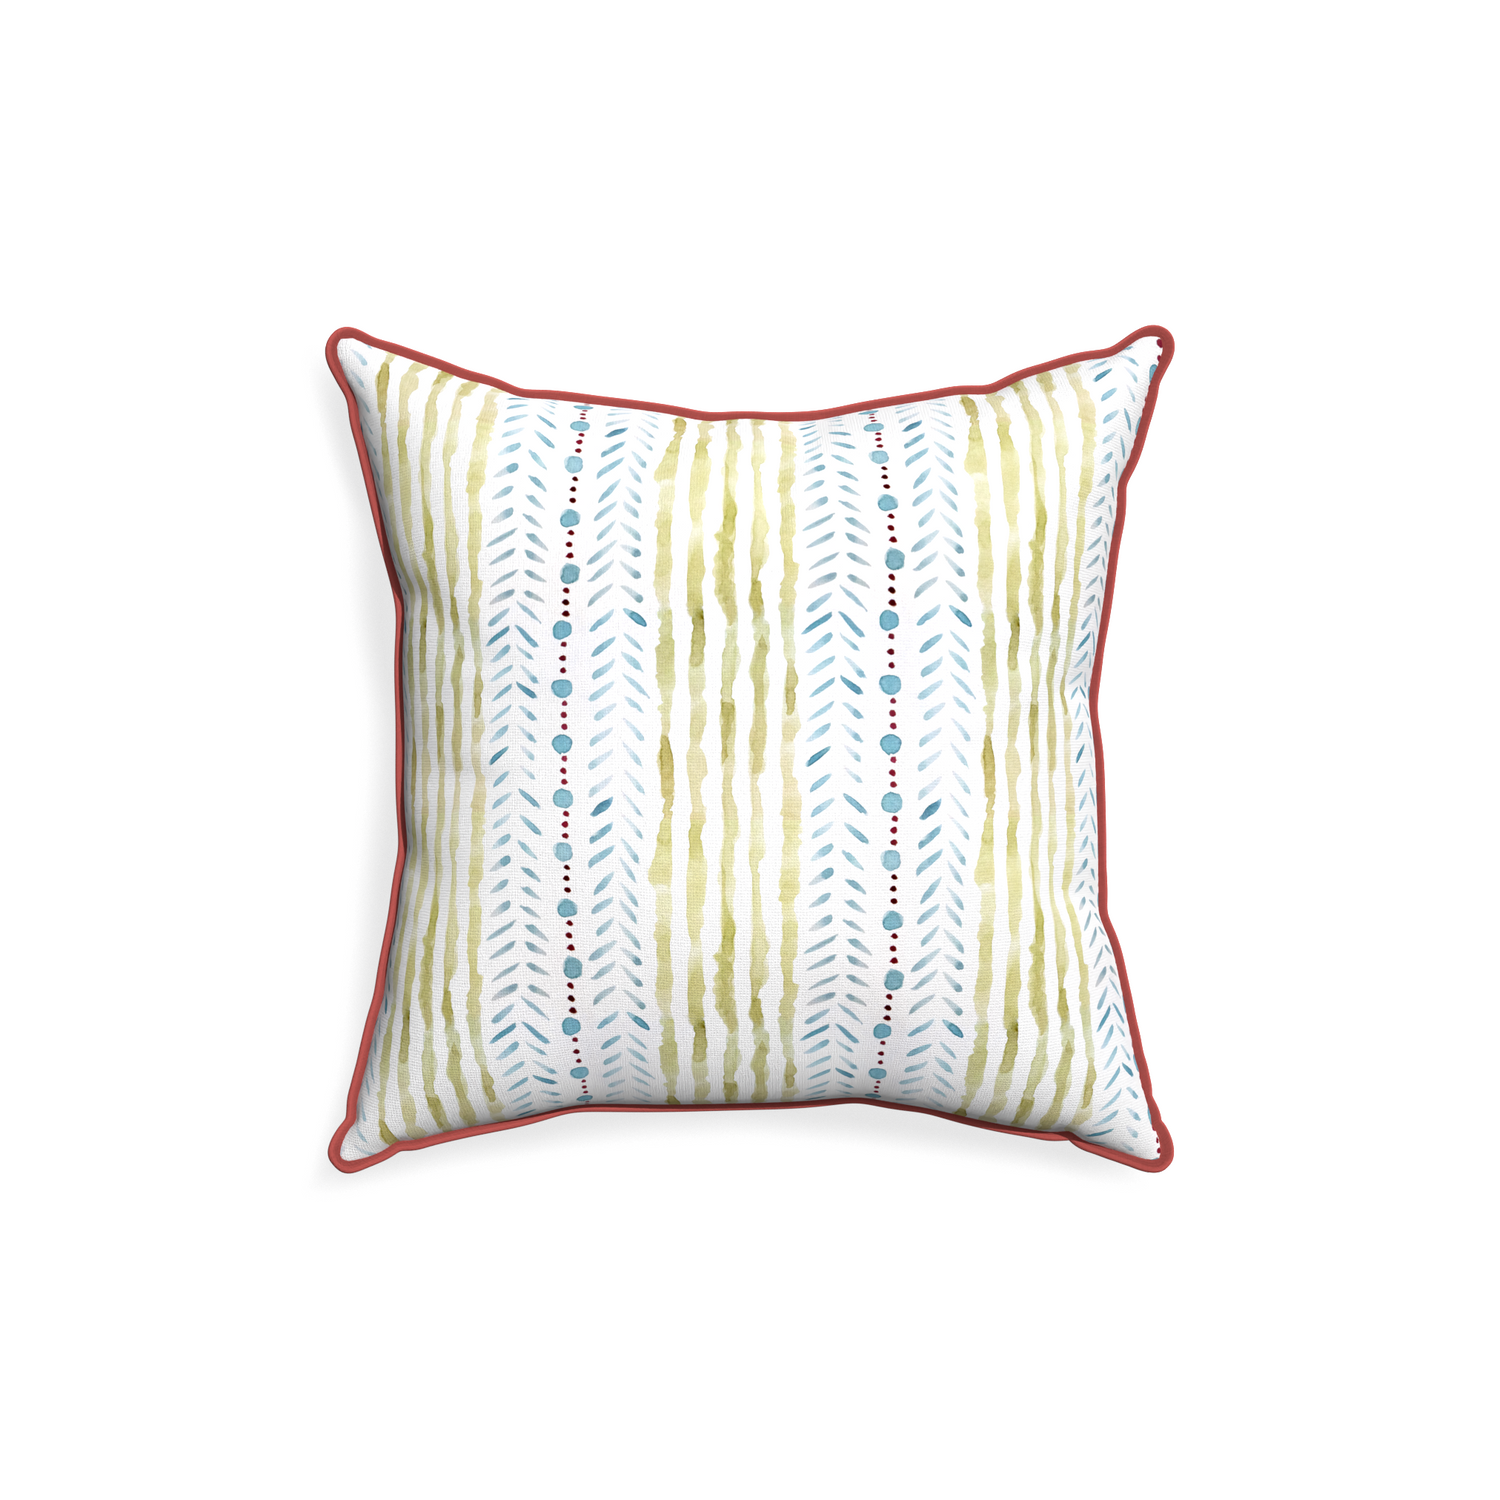 18-square julia custom blue & green stripedpillow with c piping on white background